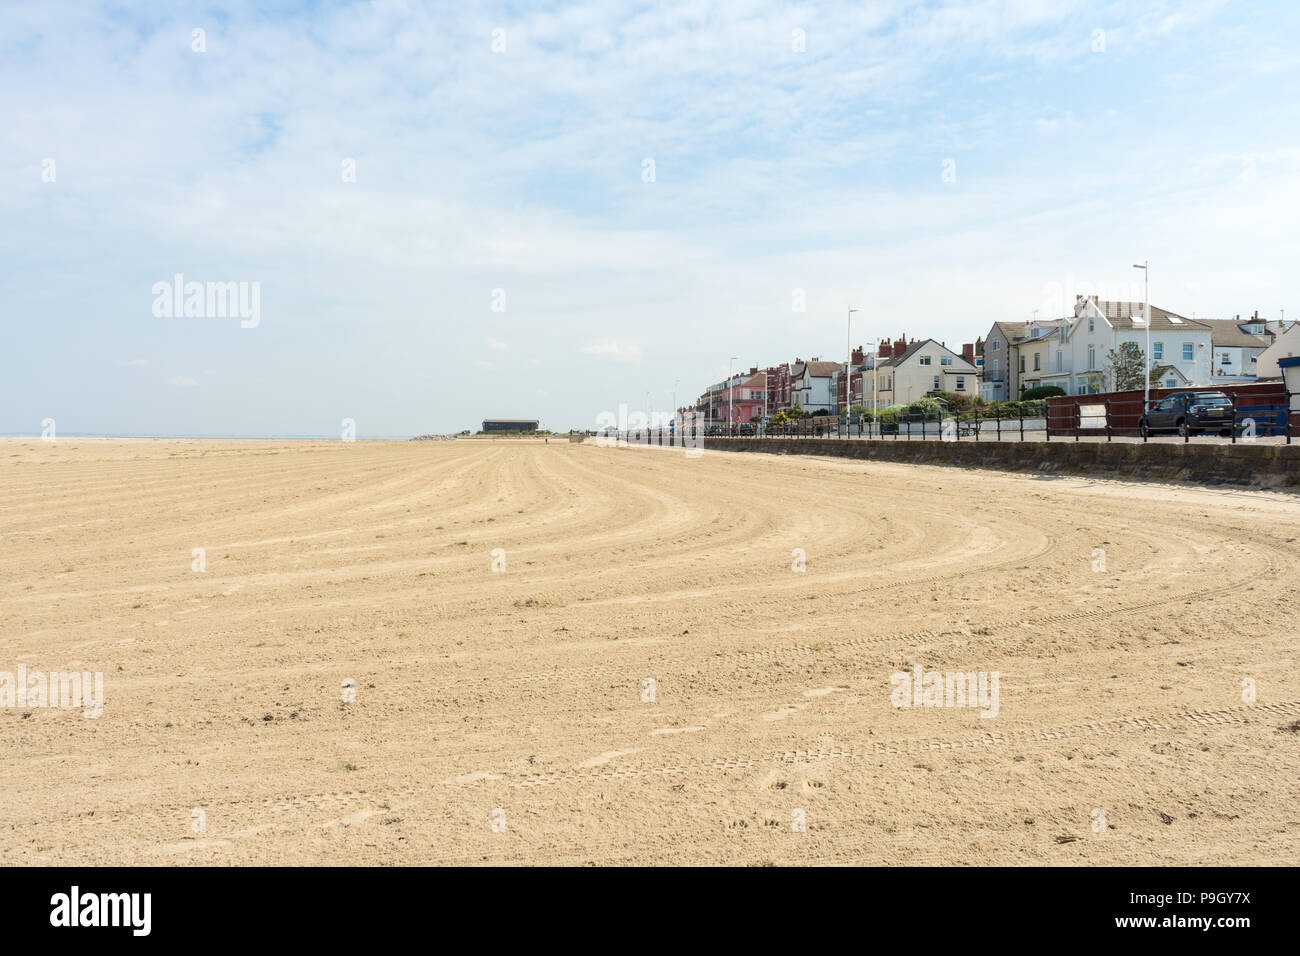 View of Hoylake, Wirral, UK from the beach with tyre tracks in the sand Stock Photo